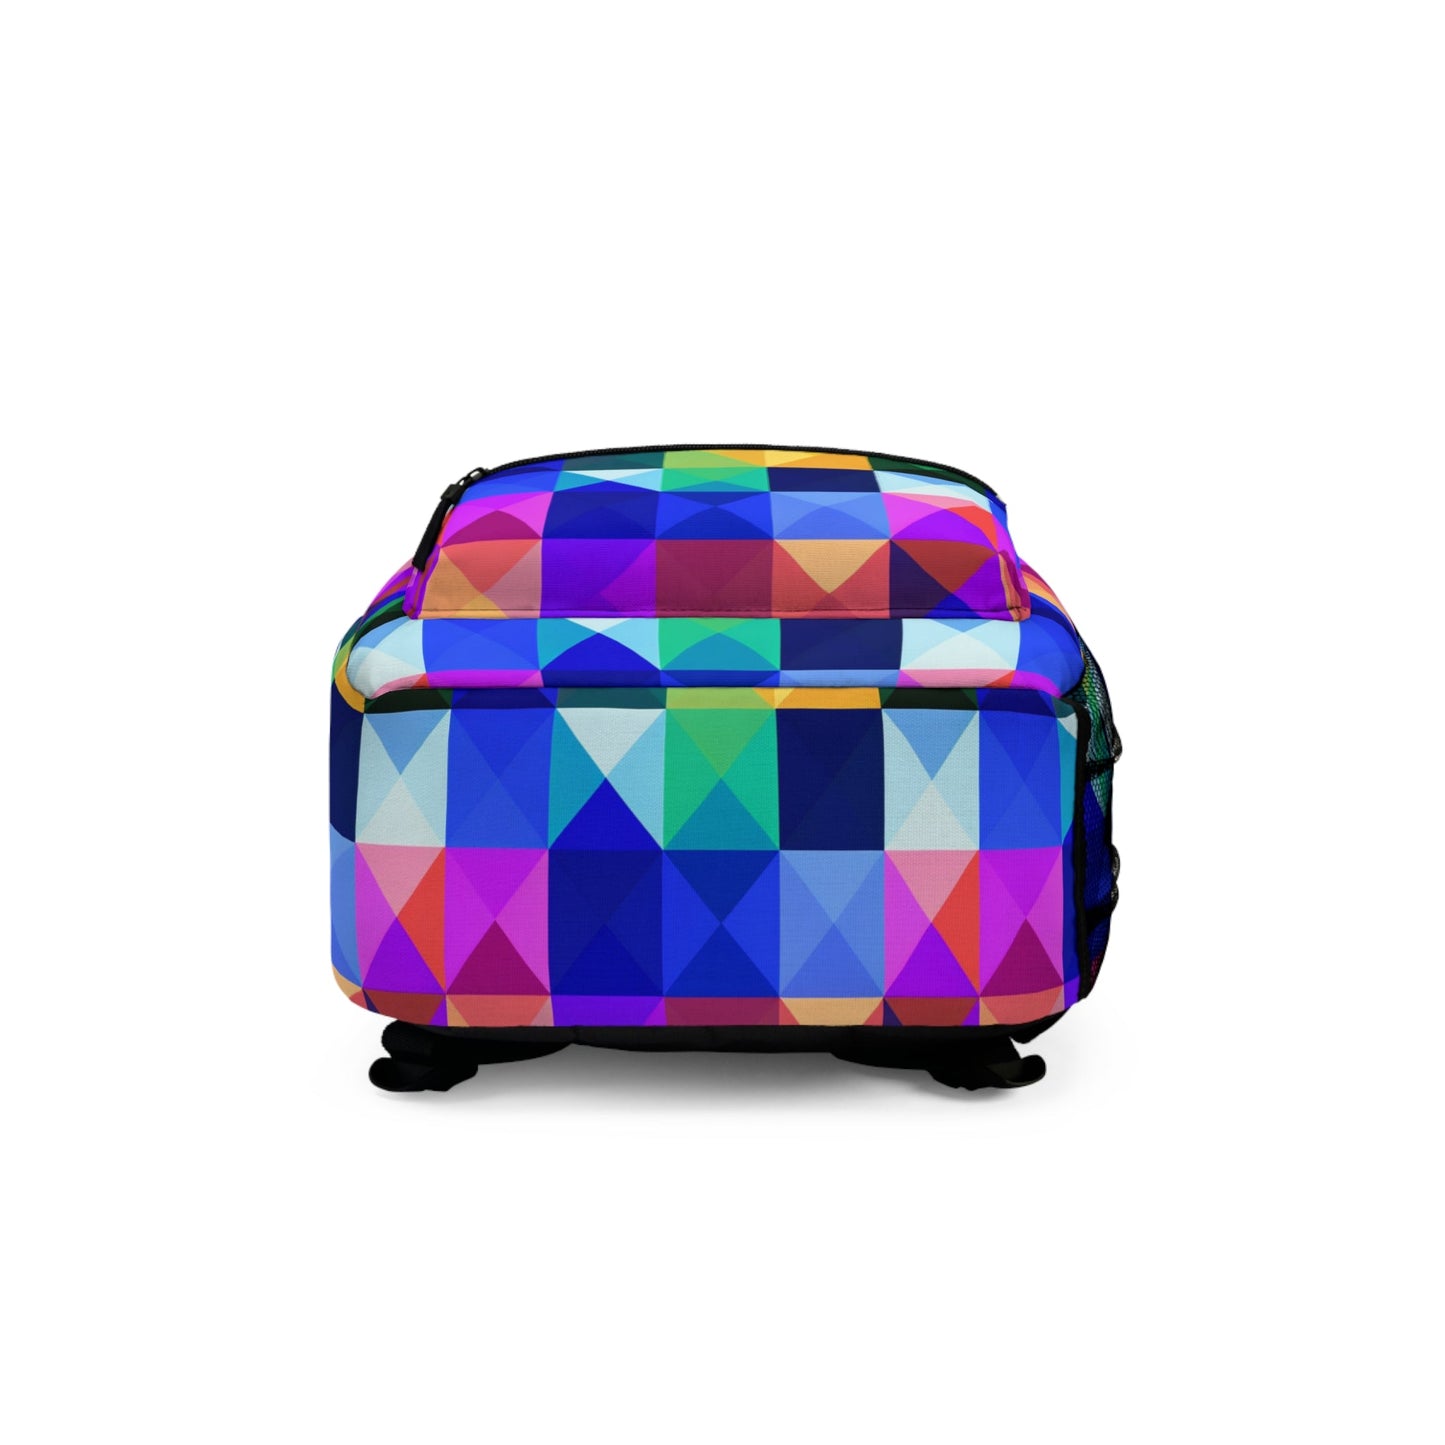 Abstract Multicolor Triangles Design in 3D  School, outdoor Backpack-Shalav5